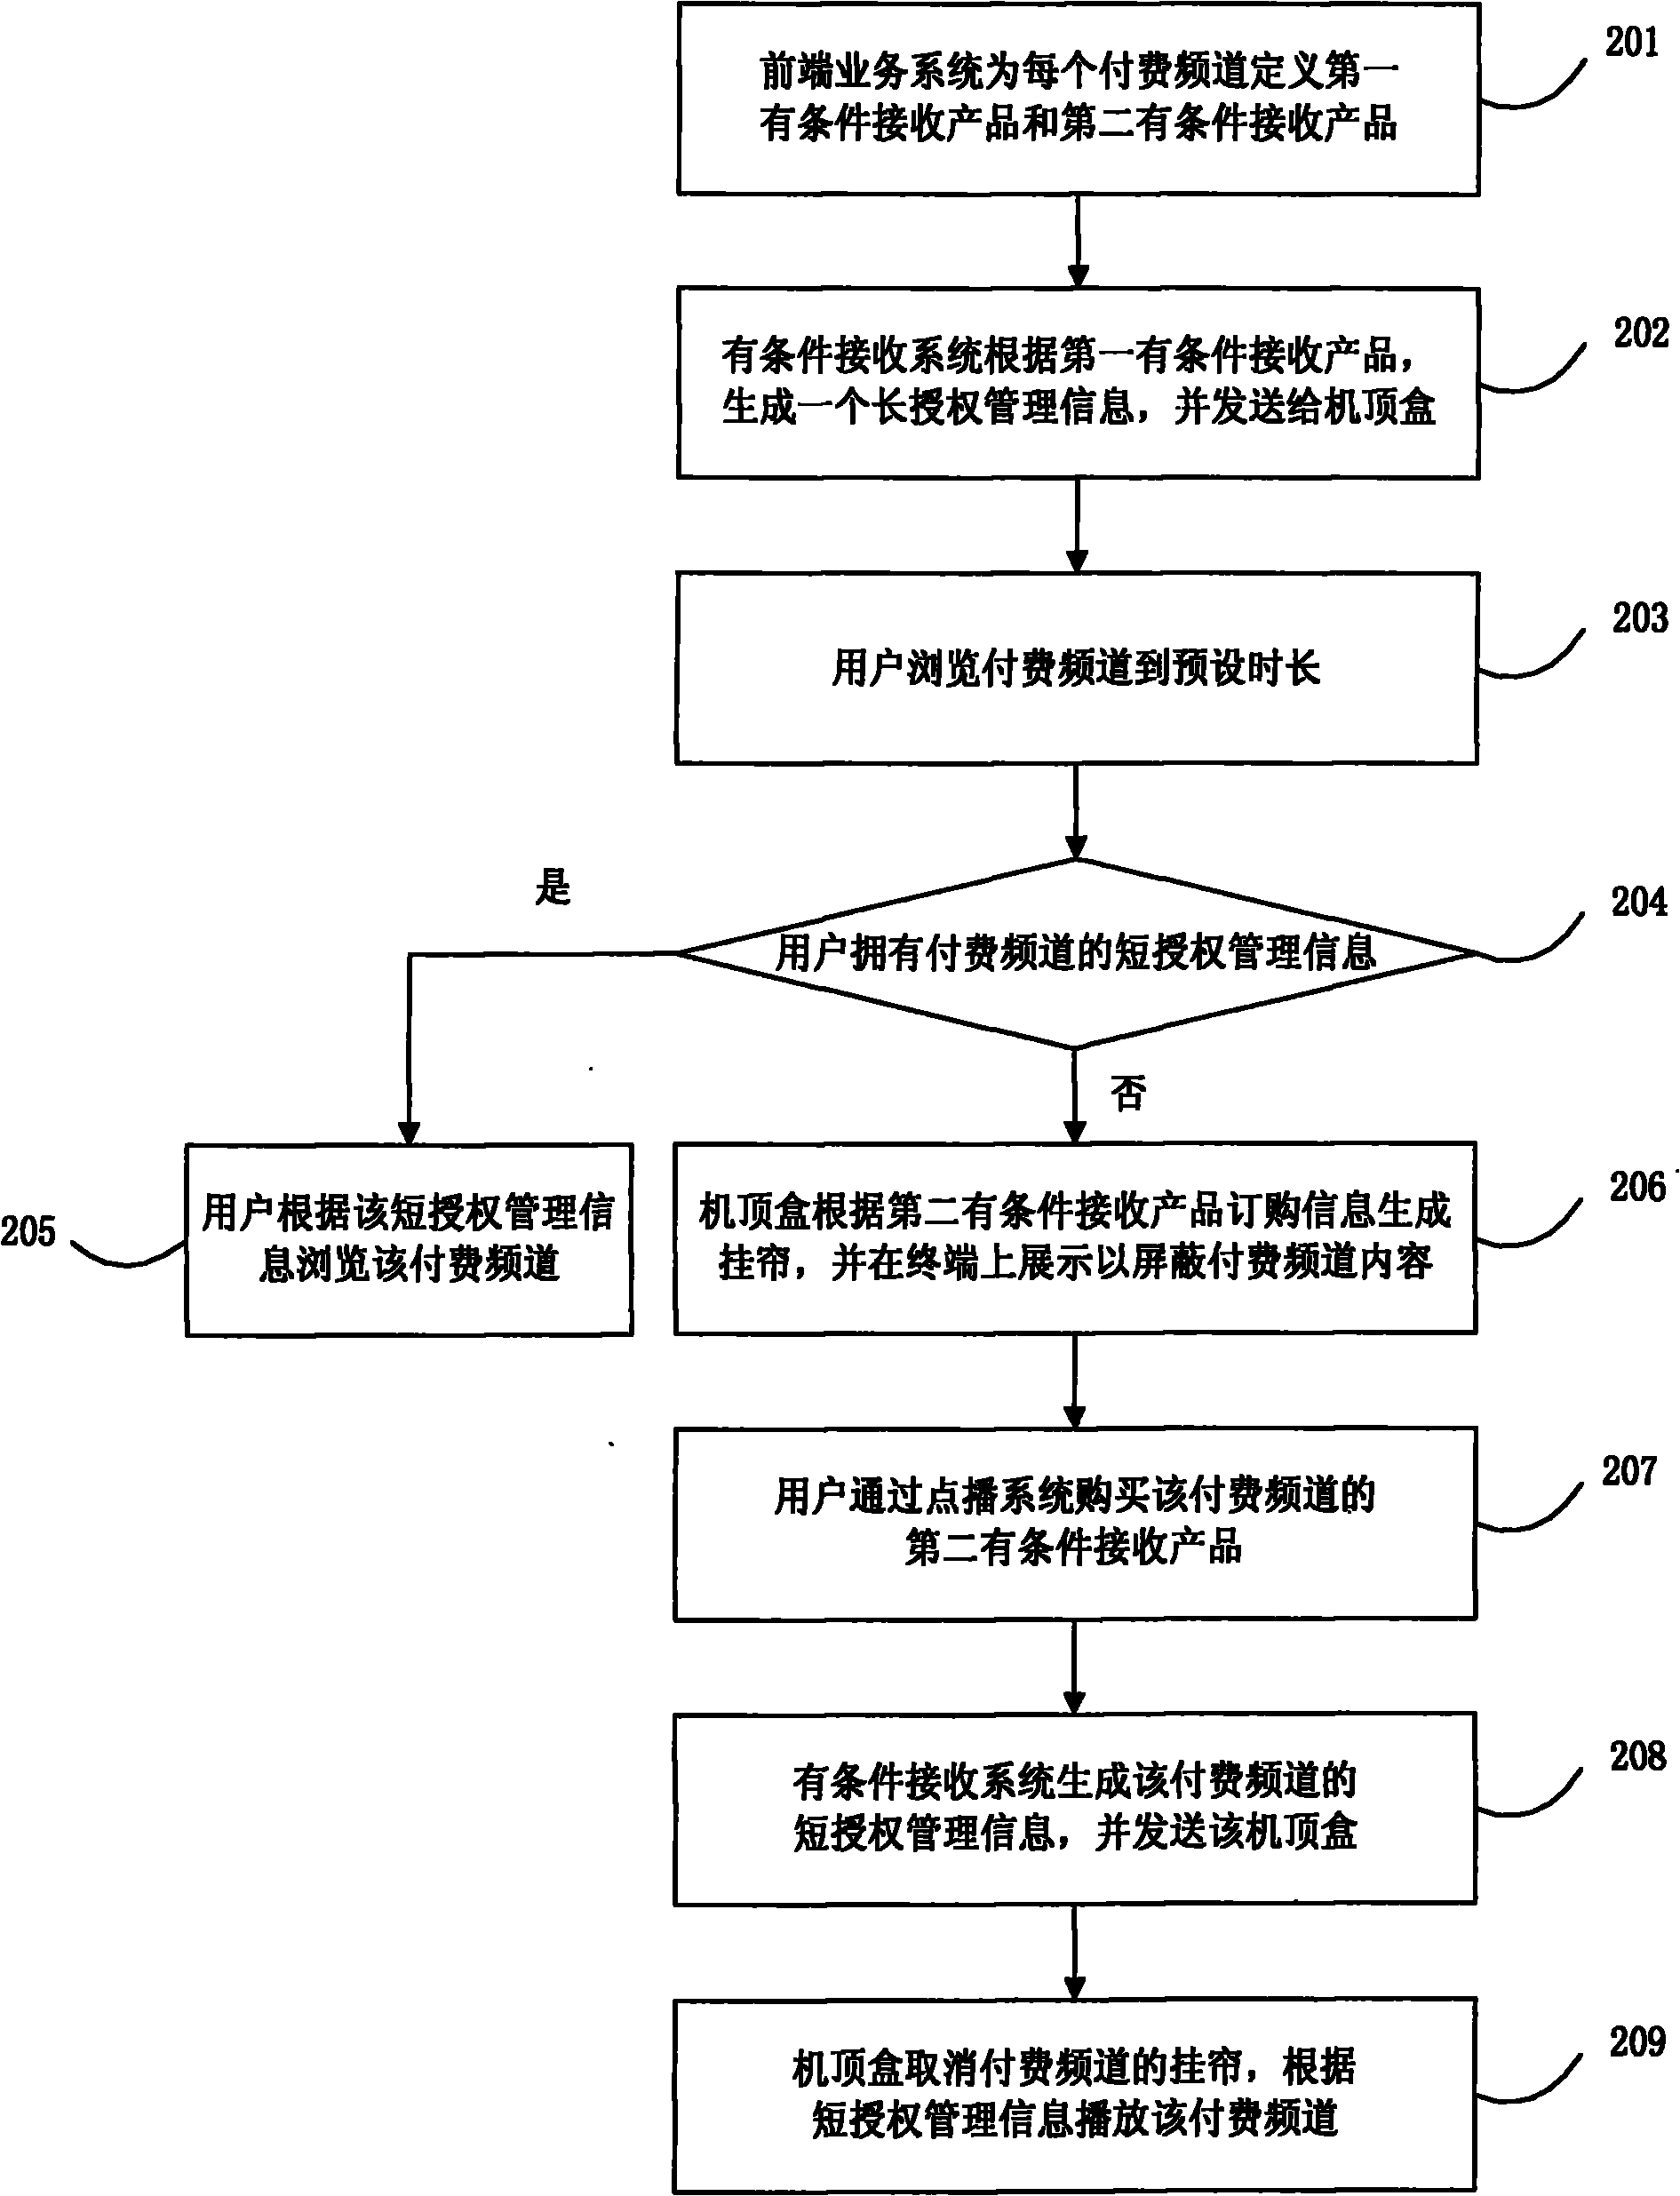 Method for previewing and subscribing pay channels of digital television